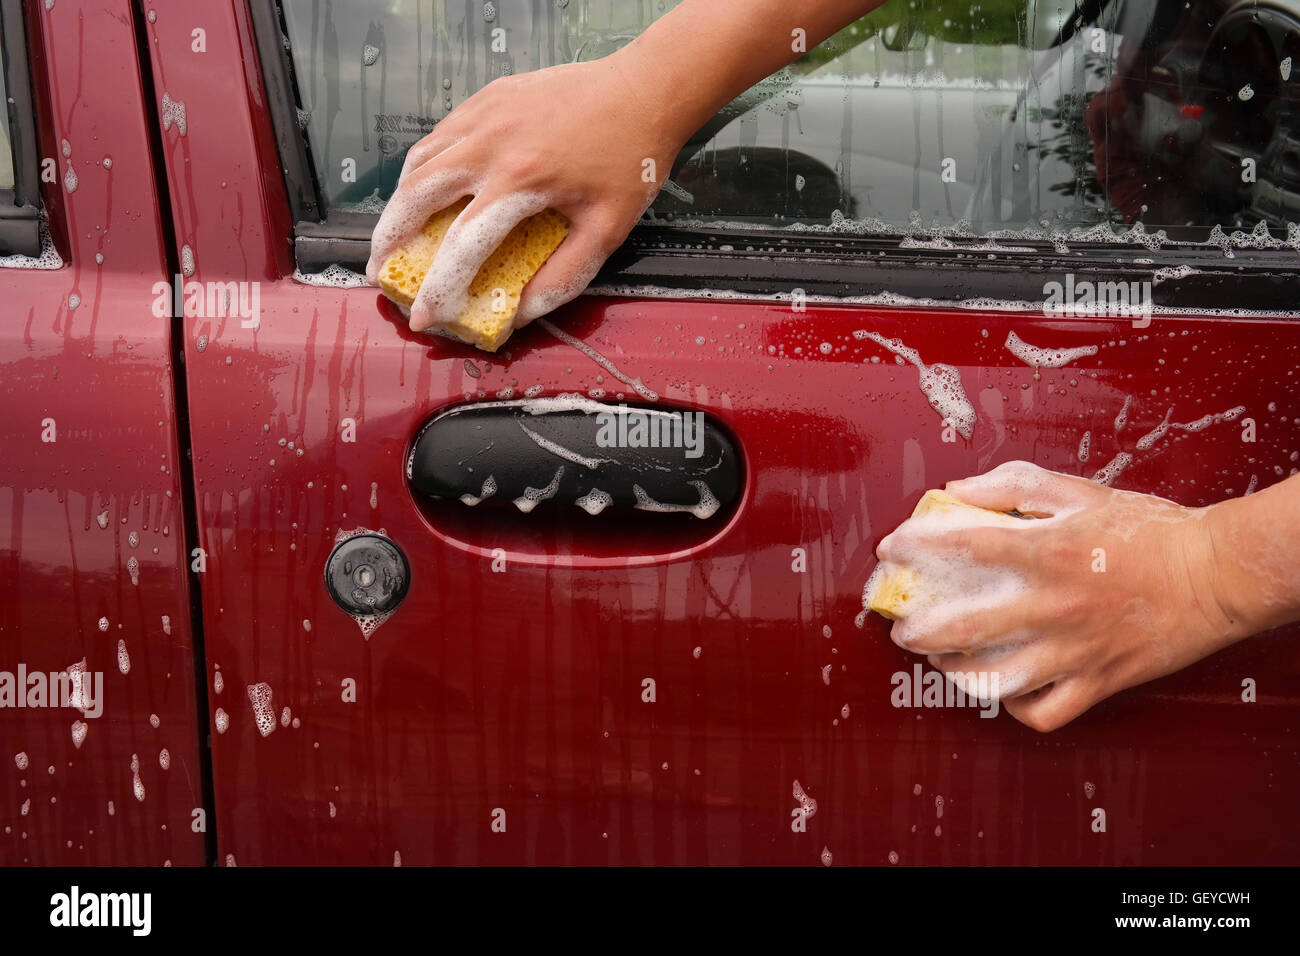 The hands of a child washing a car Stock Photo